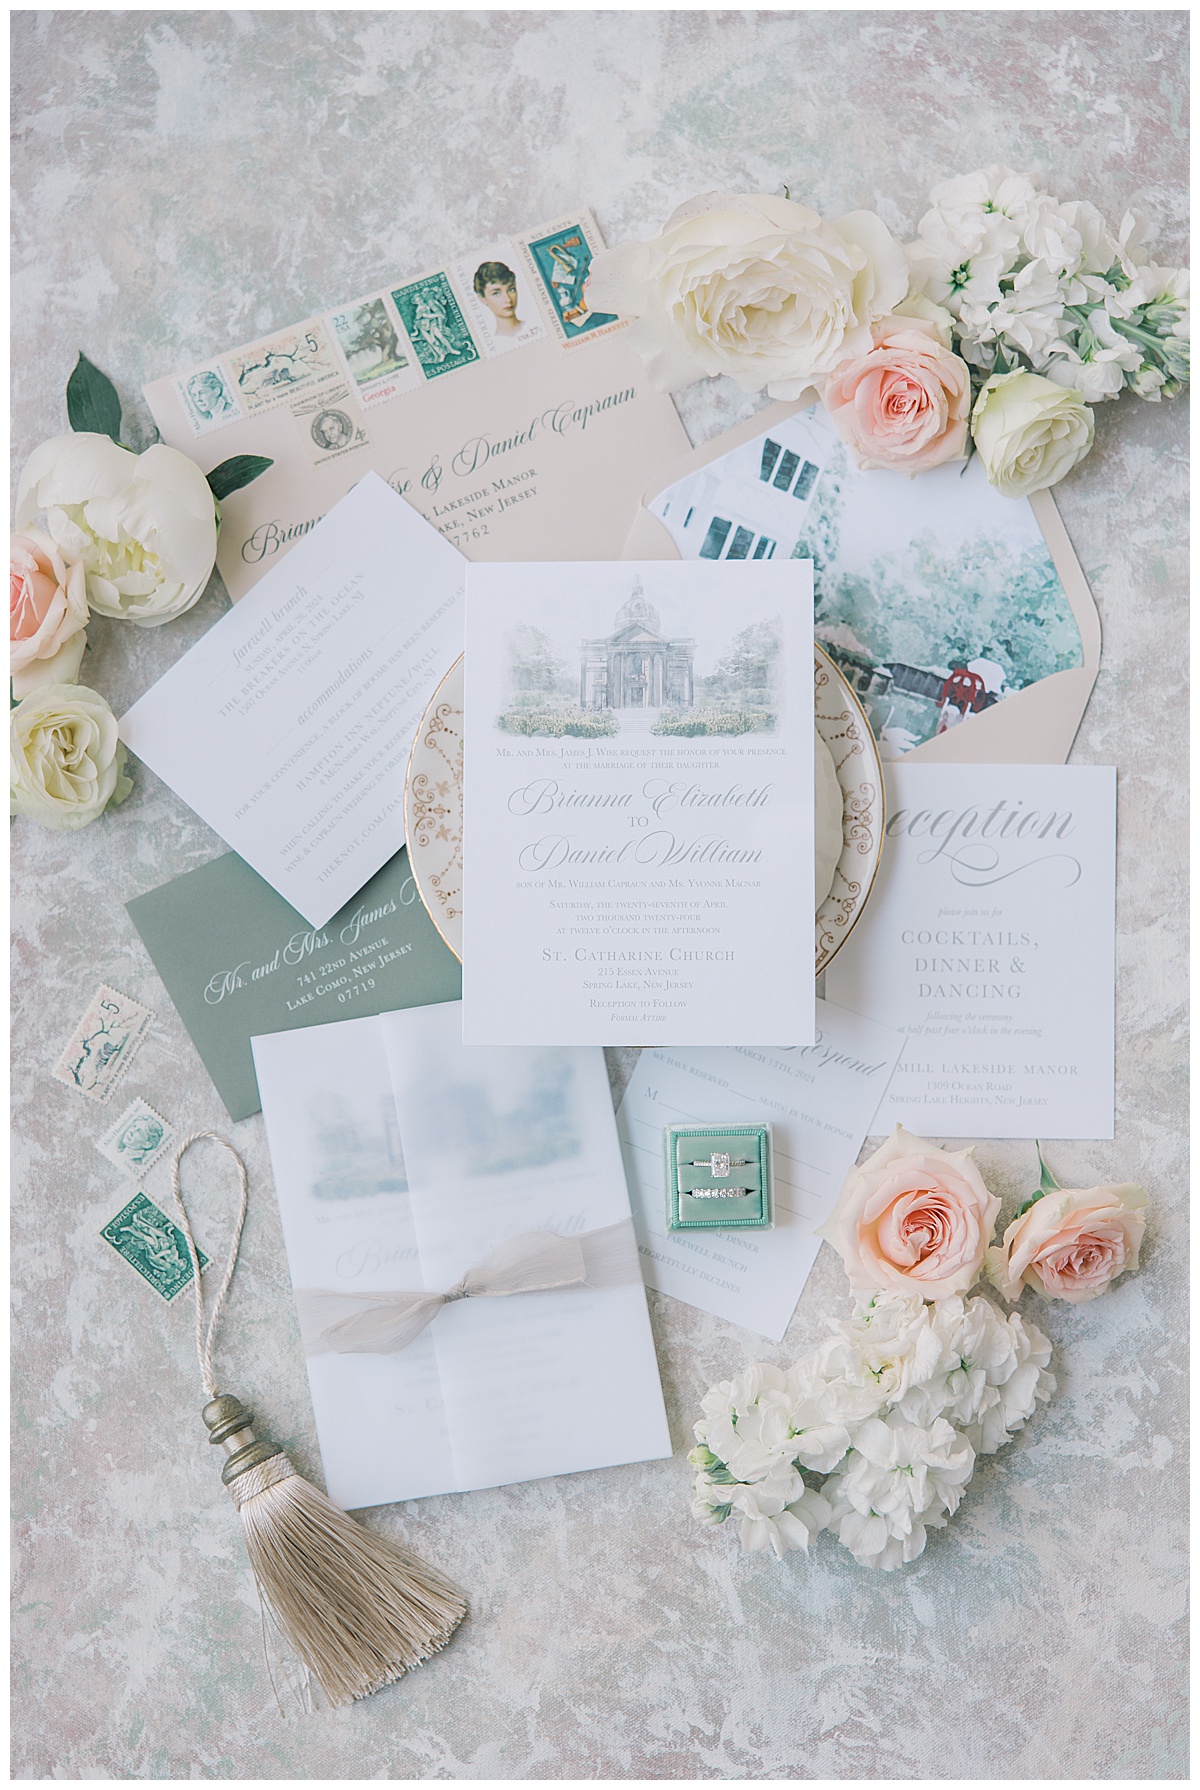 suitescape design invitation featuring st. Catharine Church on the front with sage green and white.